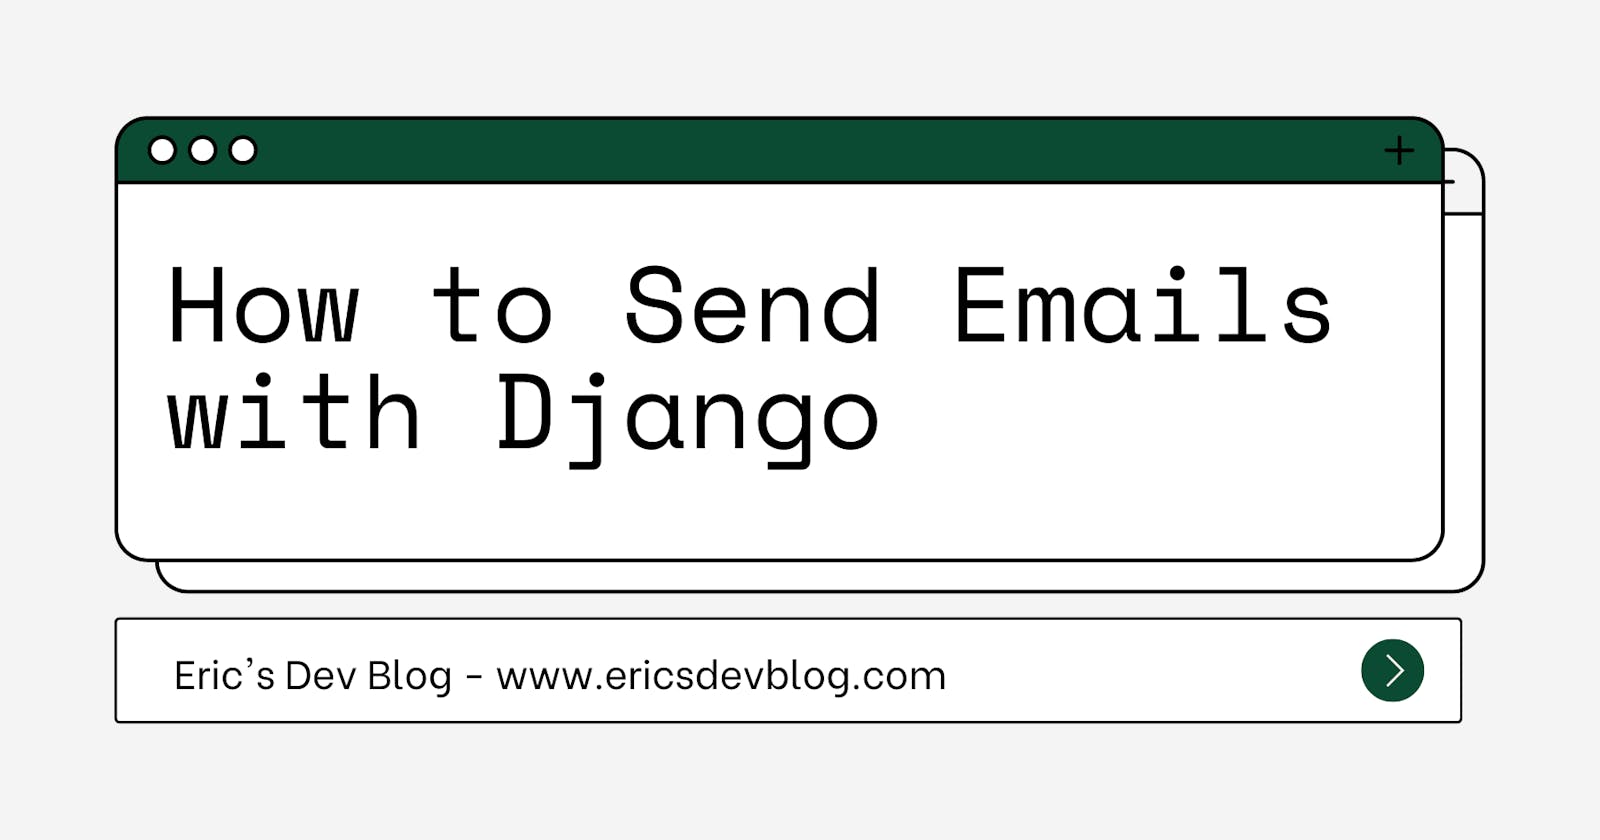 How to Send Emails with Django